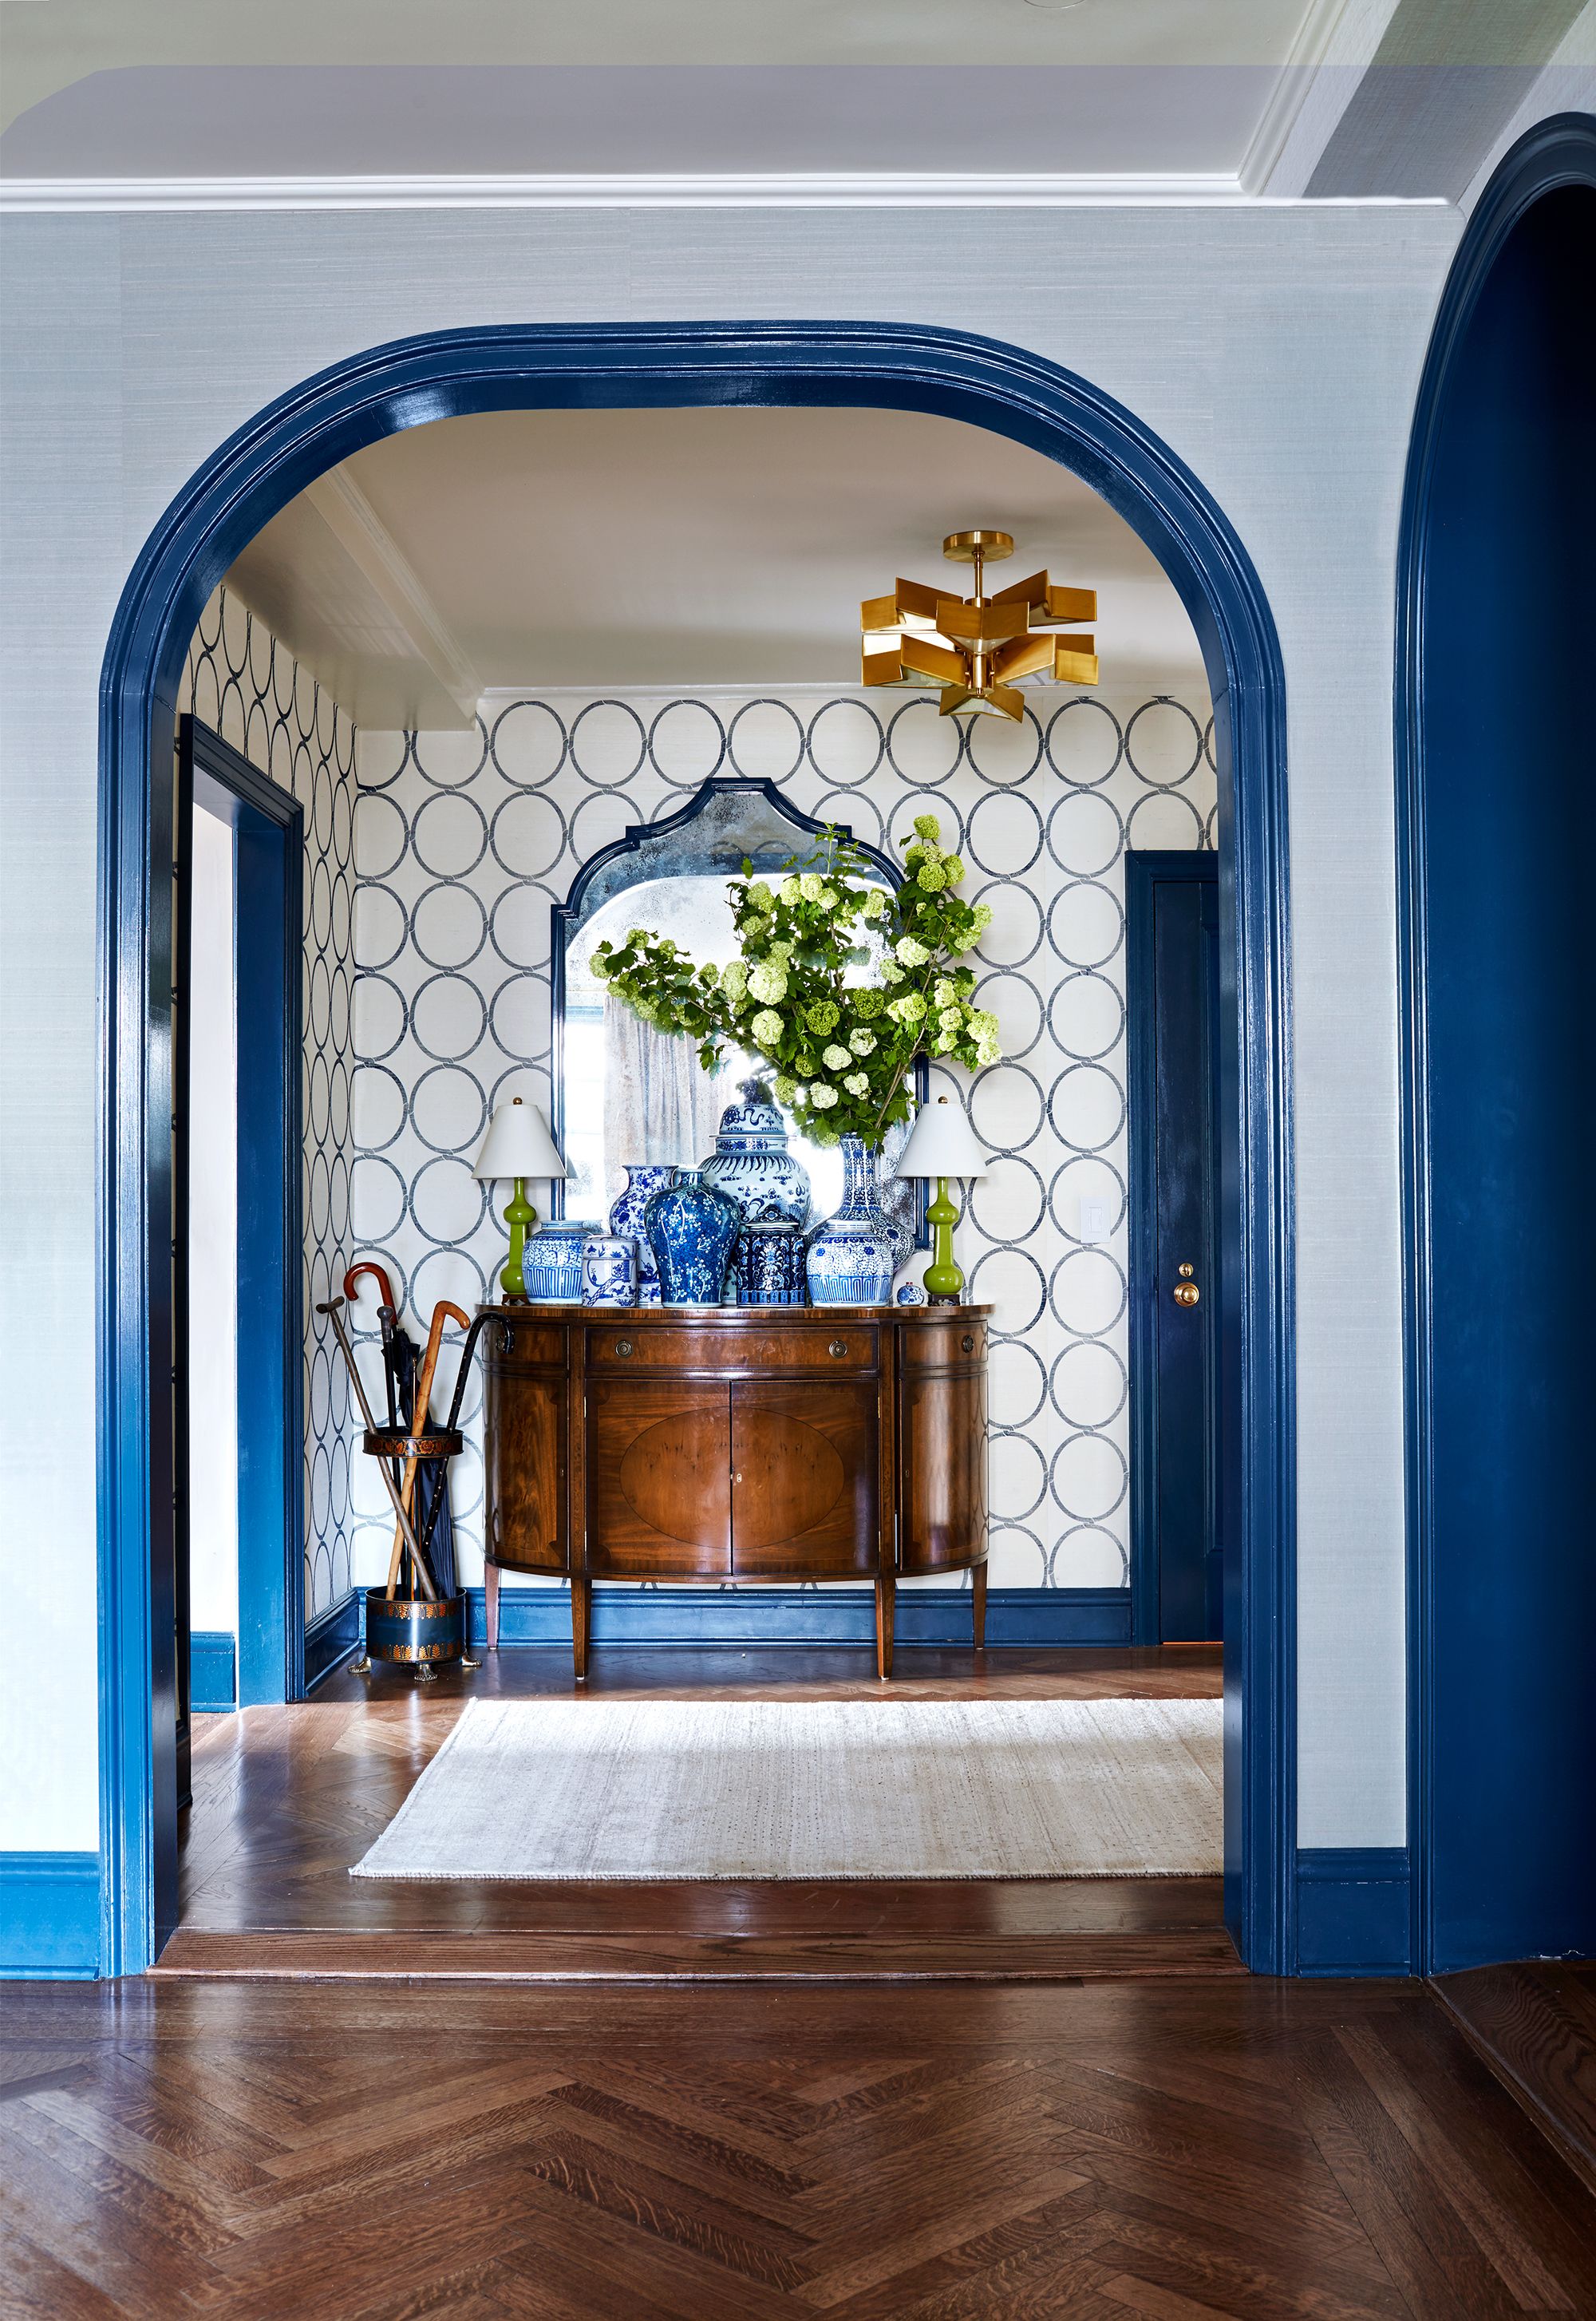 The Best Entryway Wallpaper Ideas to Give Your Space a Good First Impression